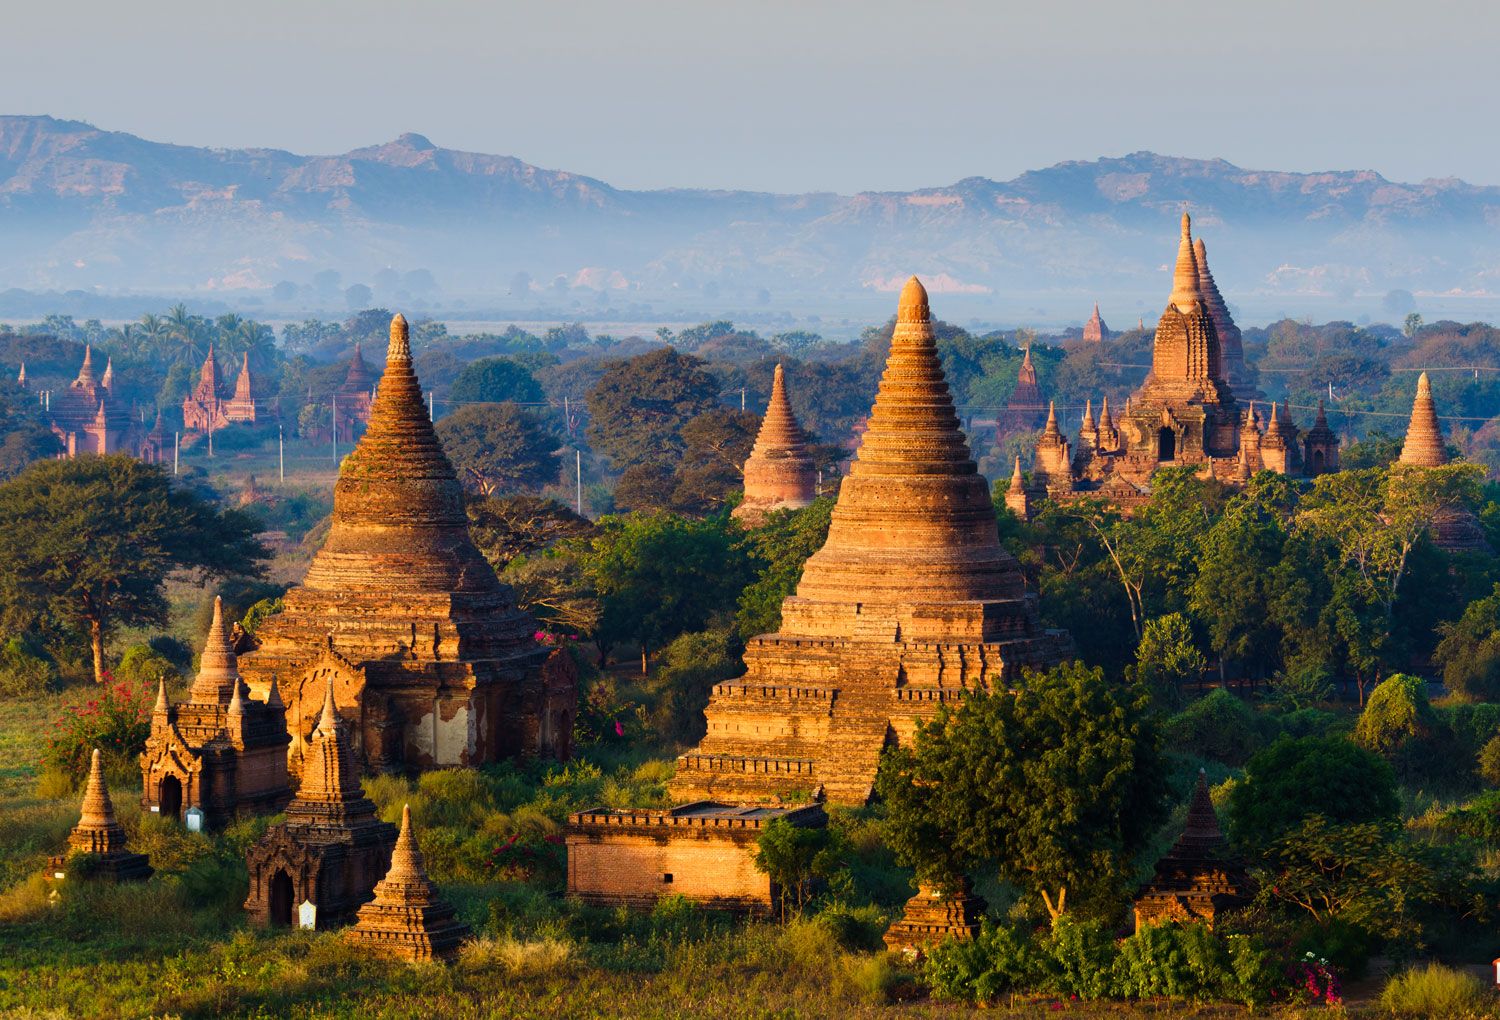 Myanmar, once closed to the world, is open.